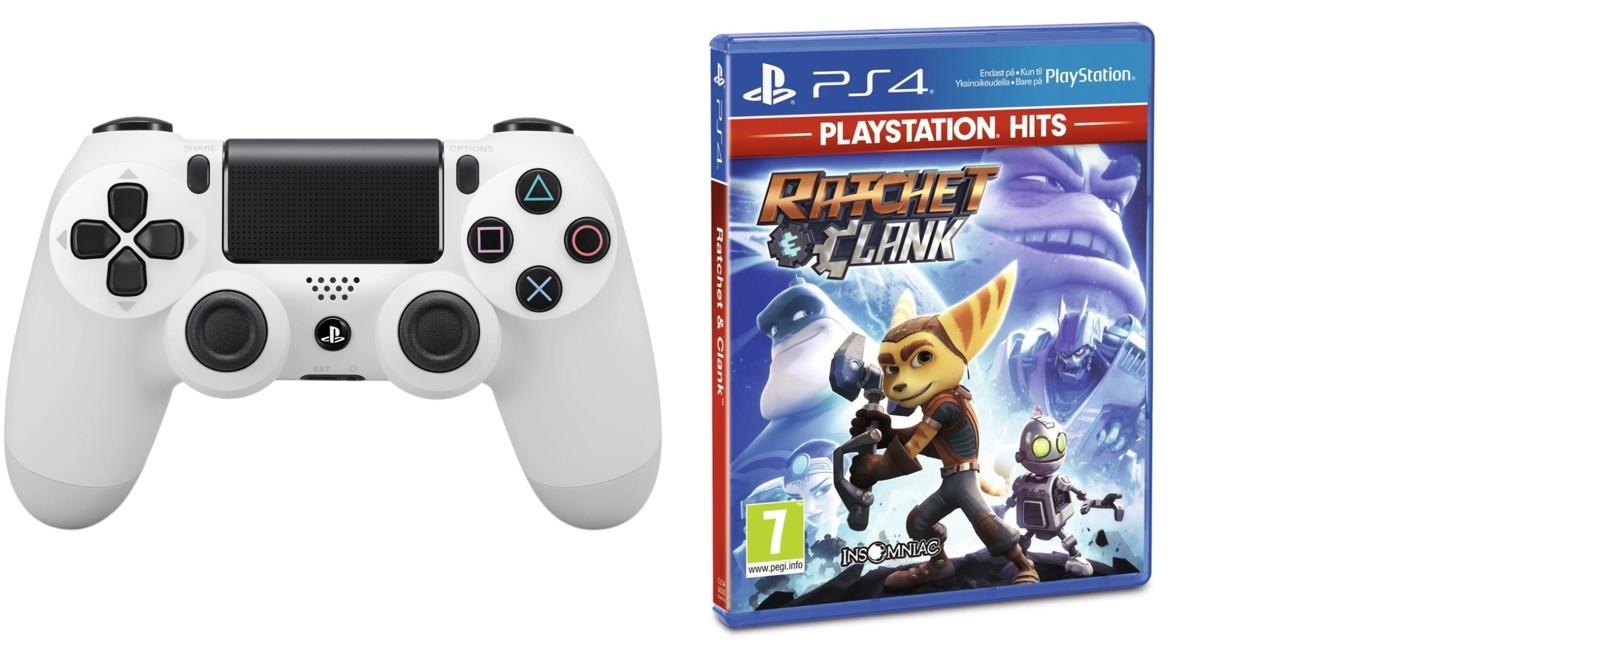 Sony Dualshock 4 Controller v2 - White + Ratchet & Clank (Playstation Hits) (Nordic)